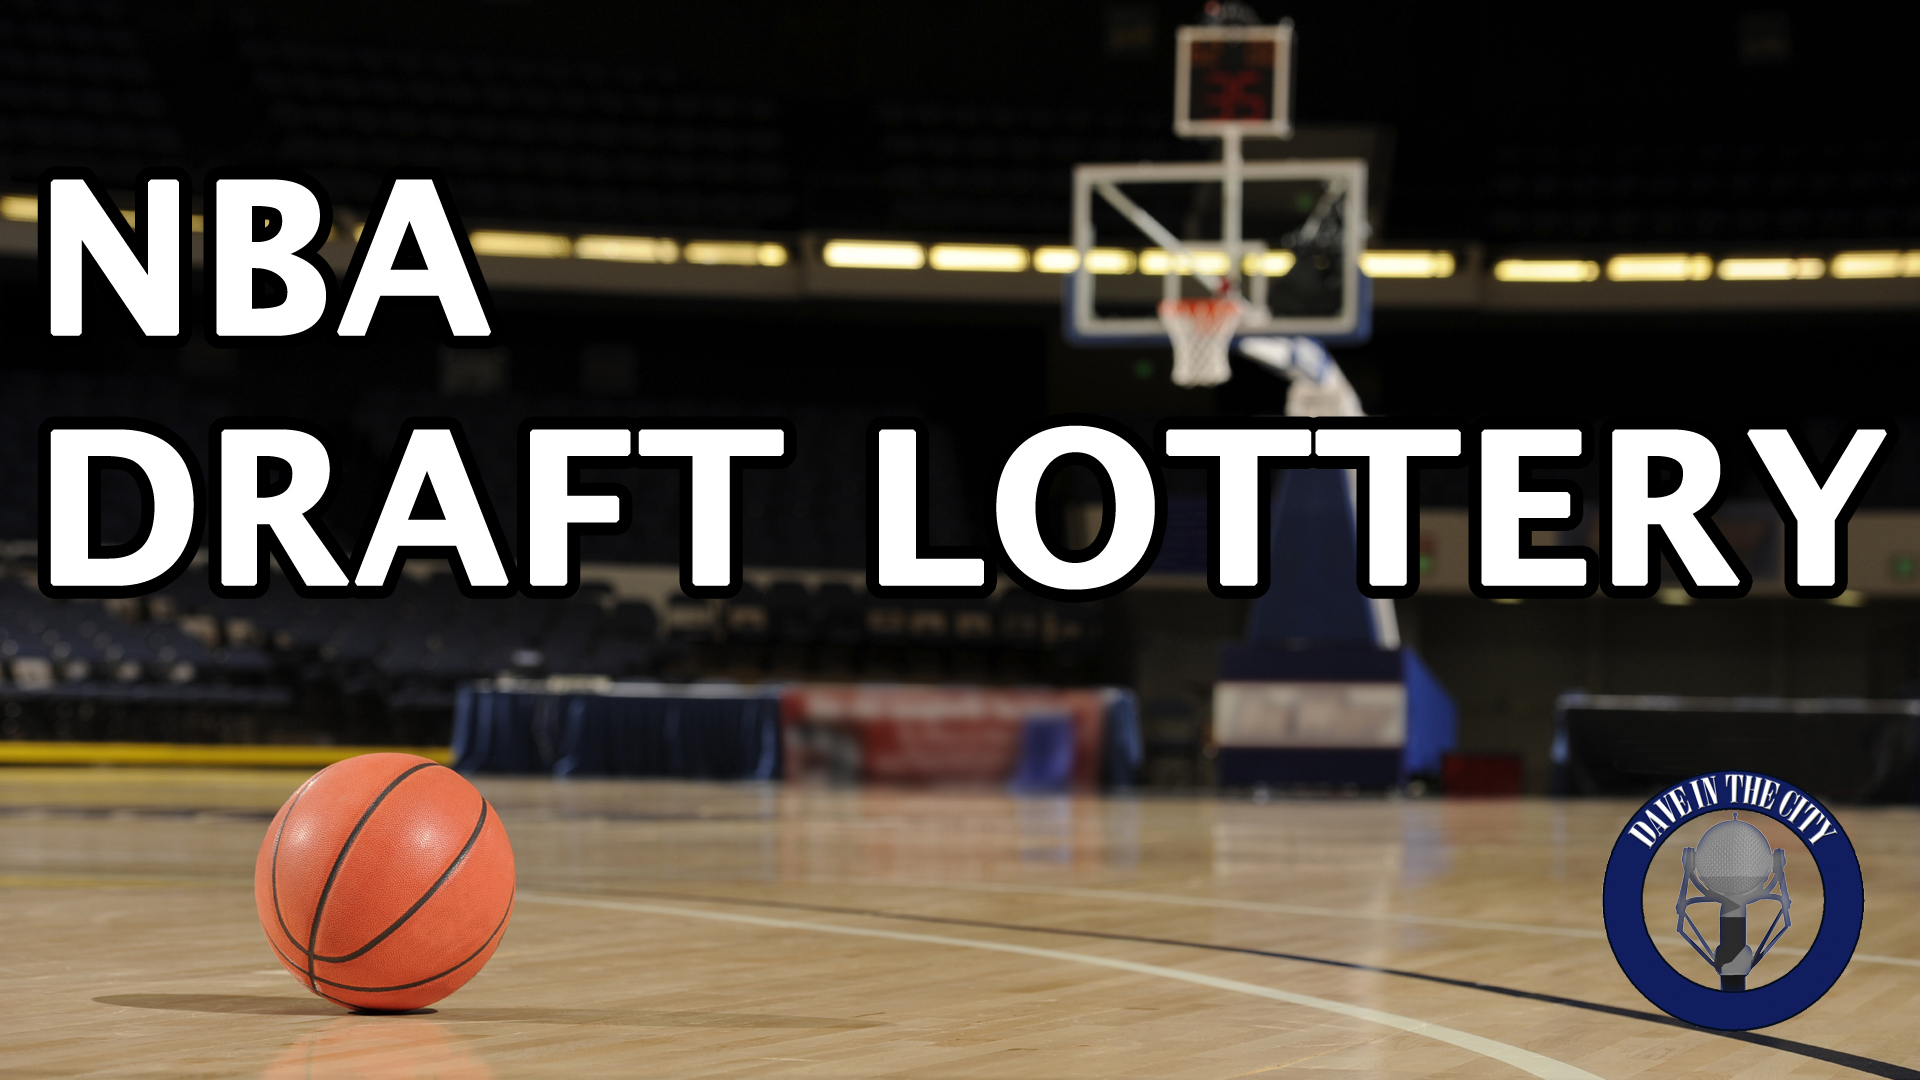 Podcast: NBA Draft Lottery, Clippers Eliminated, Warriors, NBA Playoffs, MLB (05-20-15)